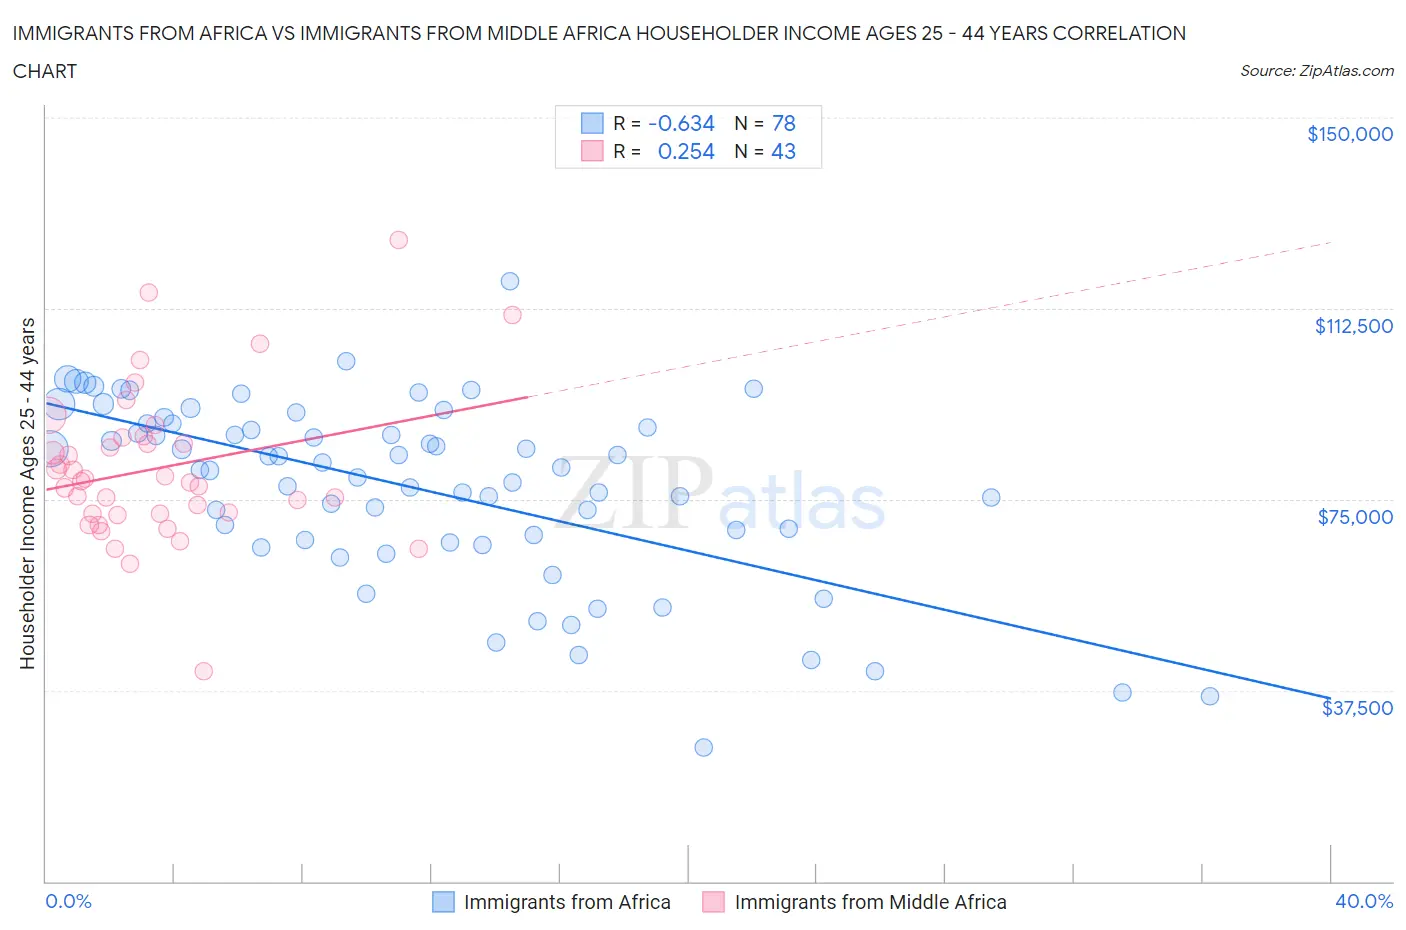 Immigrants from Africa vs Immigrants from Middle Africa Householder Income Ages 25 - 44 years